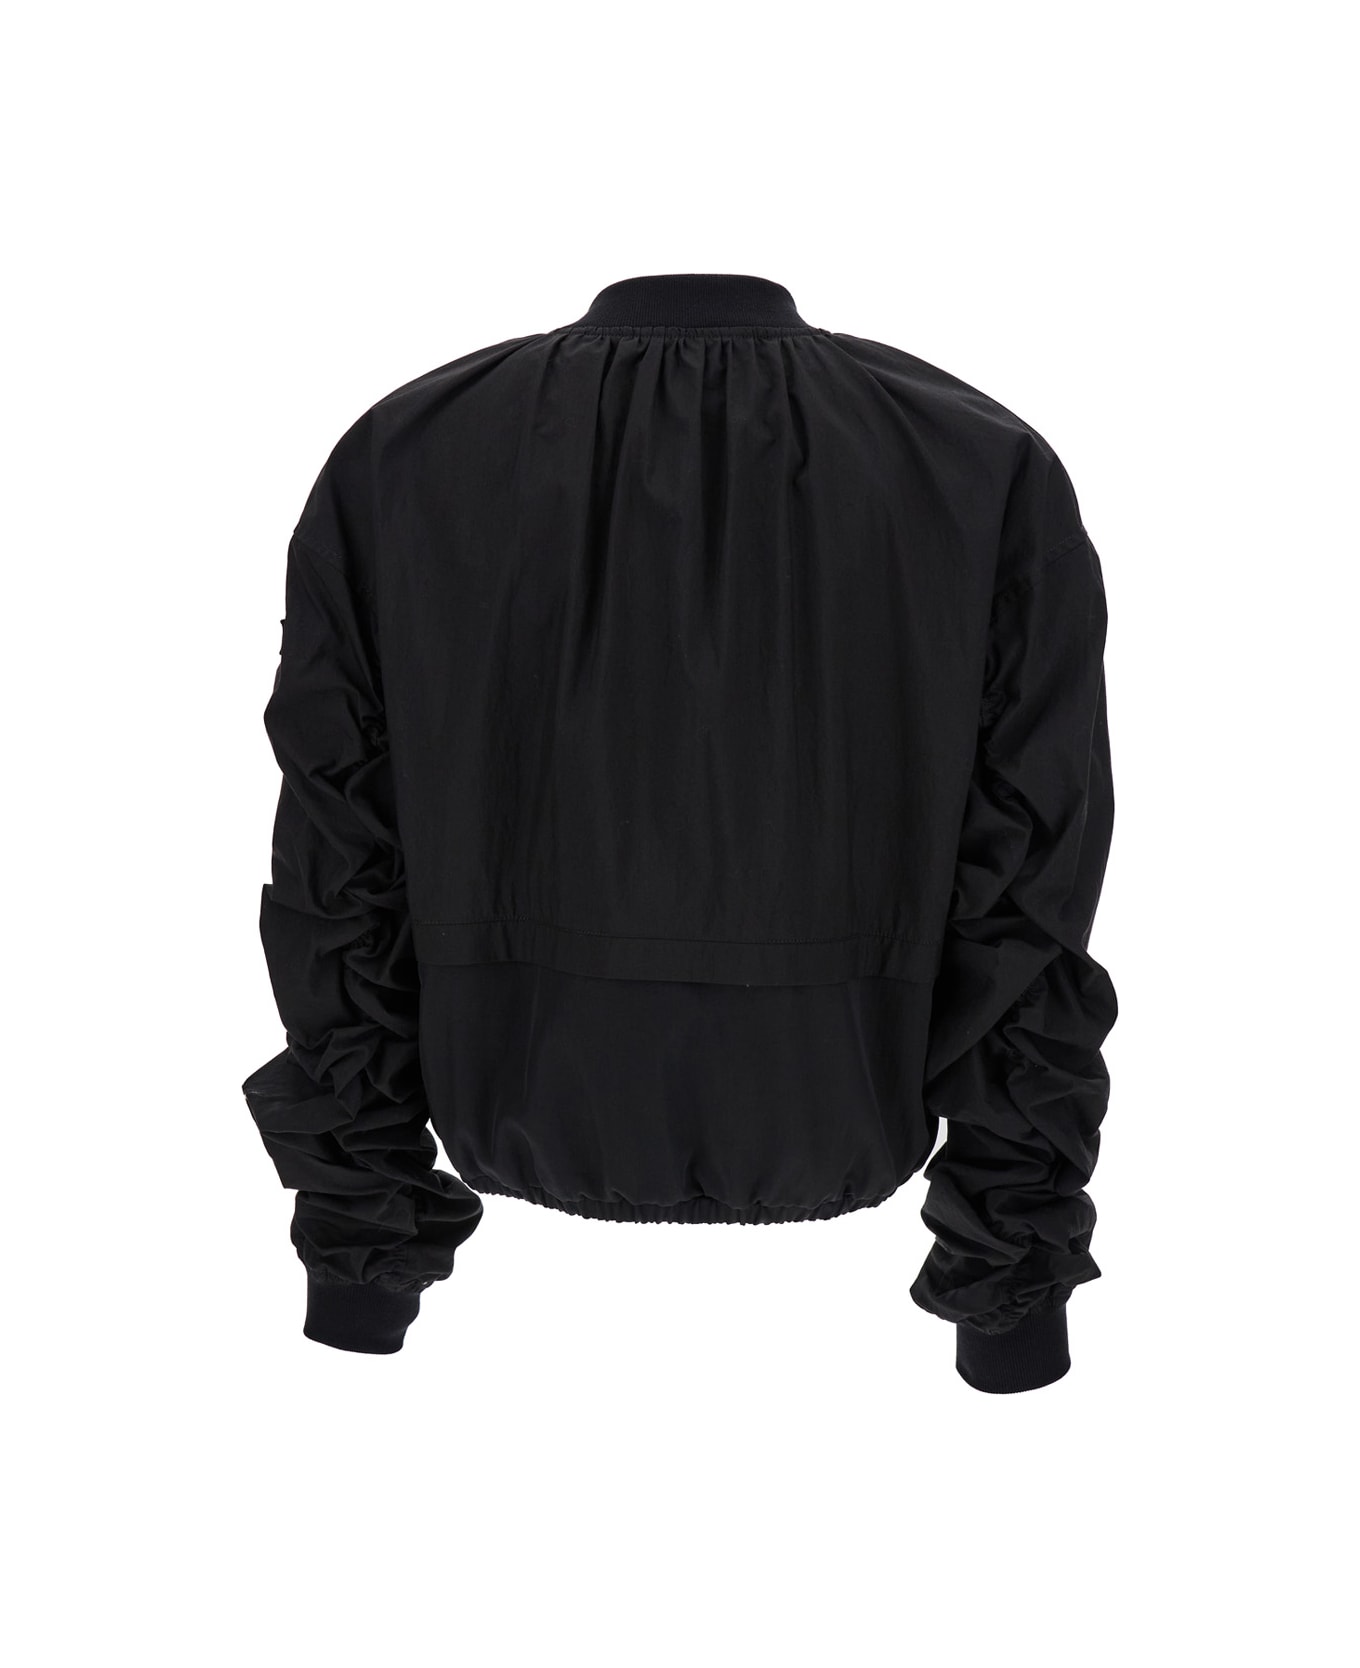 TATRAS Bomber Jacket With Curled Sleeves In Technical Fabric Woman - Black